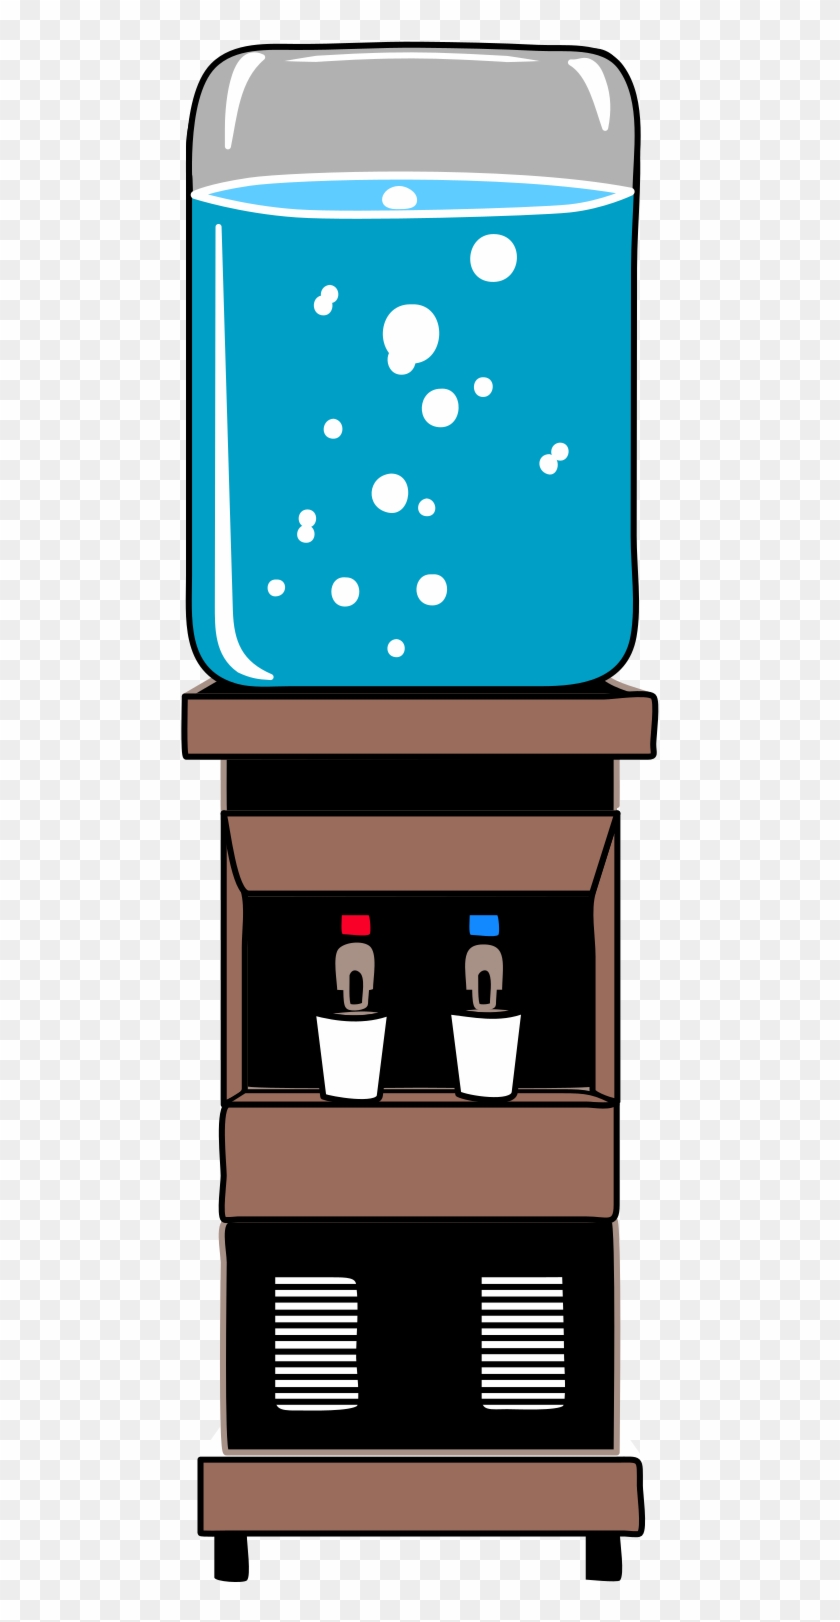 This Image Rendered As Png In Other Widths - Water Cooler Clipart #1213888